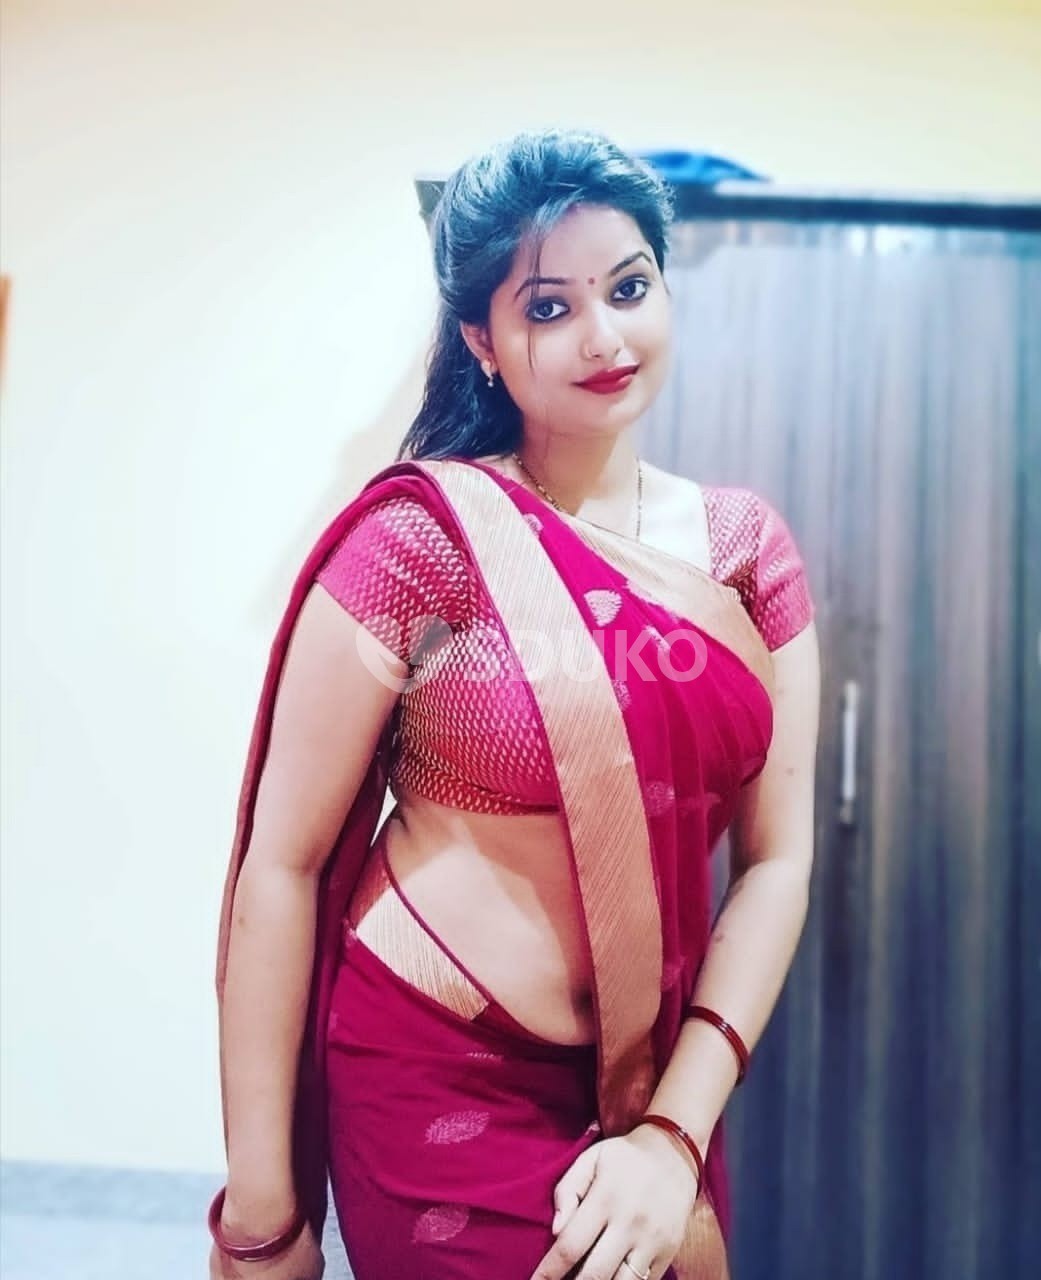 86906/17690 NUNGAMBAKKAM CHENNAI  ✅ 24x7 AFFORDABLE CHEAPEST RATE SAFE COLLEGE GIRL AVAILABLE IN-CALL OUT-CALL AVAILAB